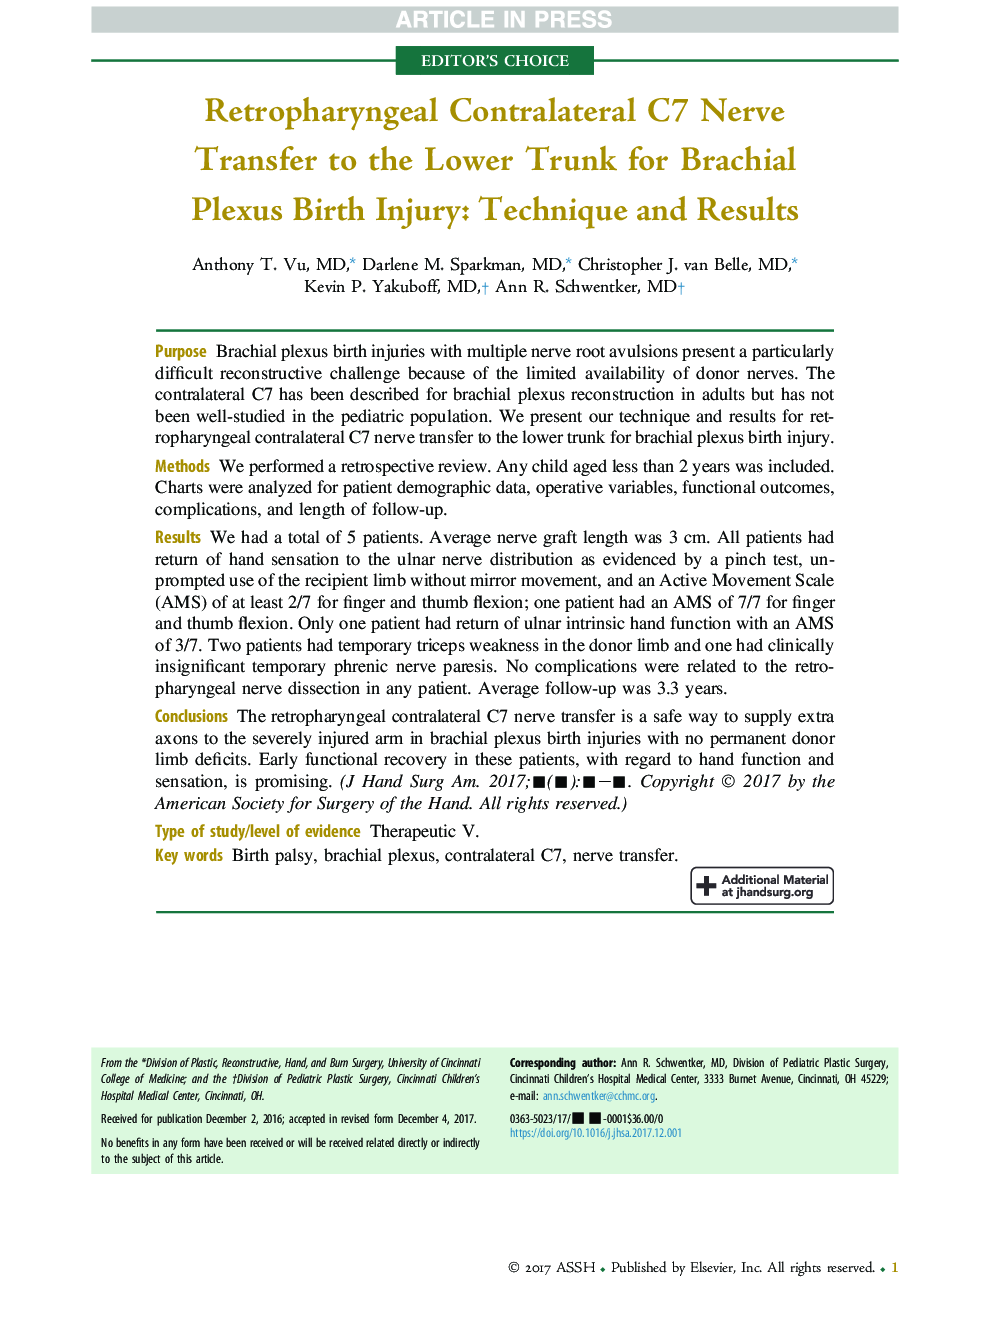 Retropharyngeal Contralateral C7 Nerve Transfer to the Lower Trunk for Brachial Plexus Birth Injury: Technique and Results